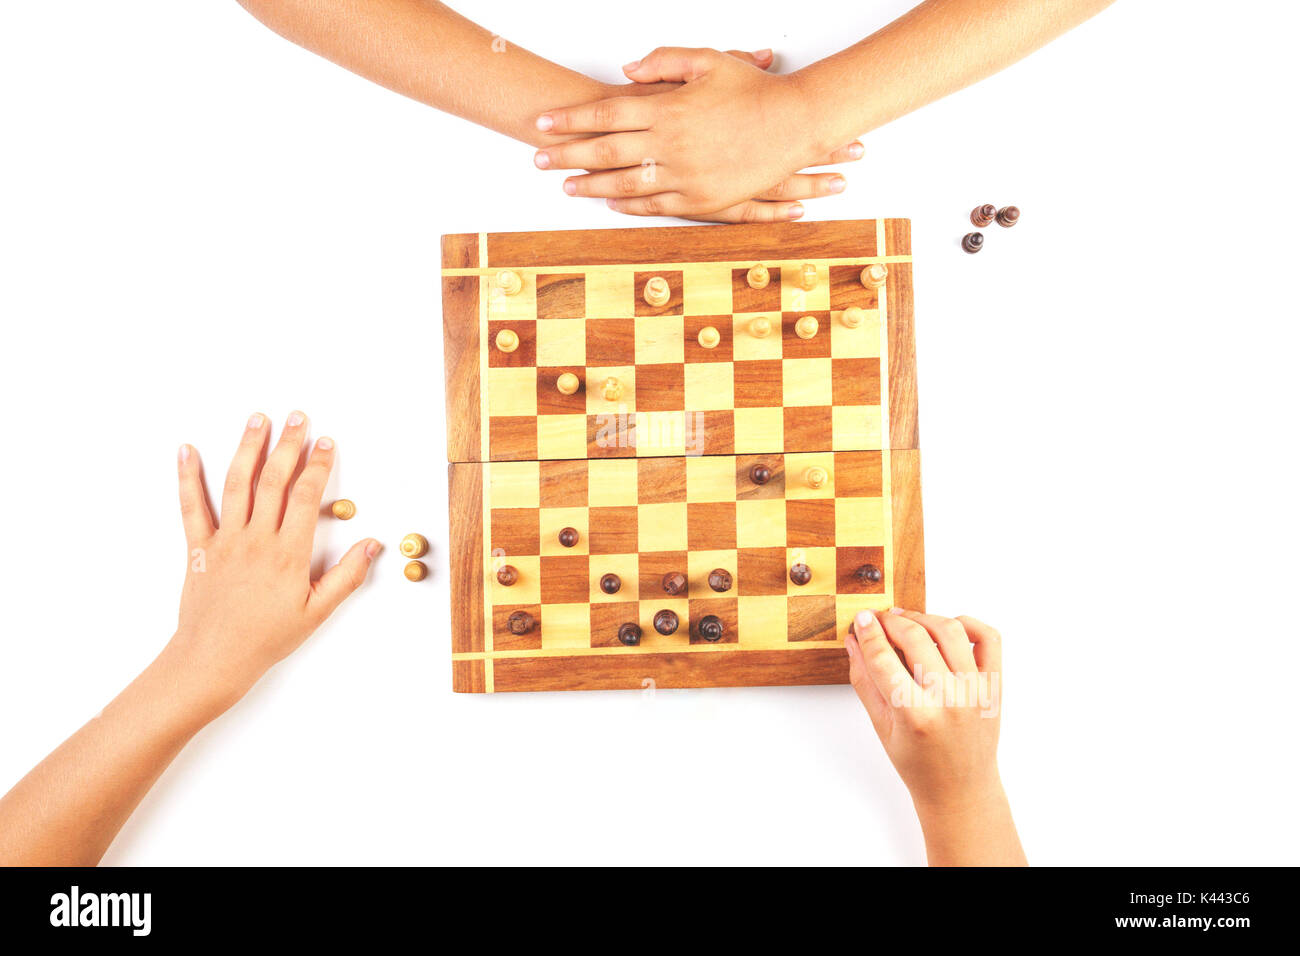 Chess board with chess pieces and a playing kids hand. Stock Photo